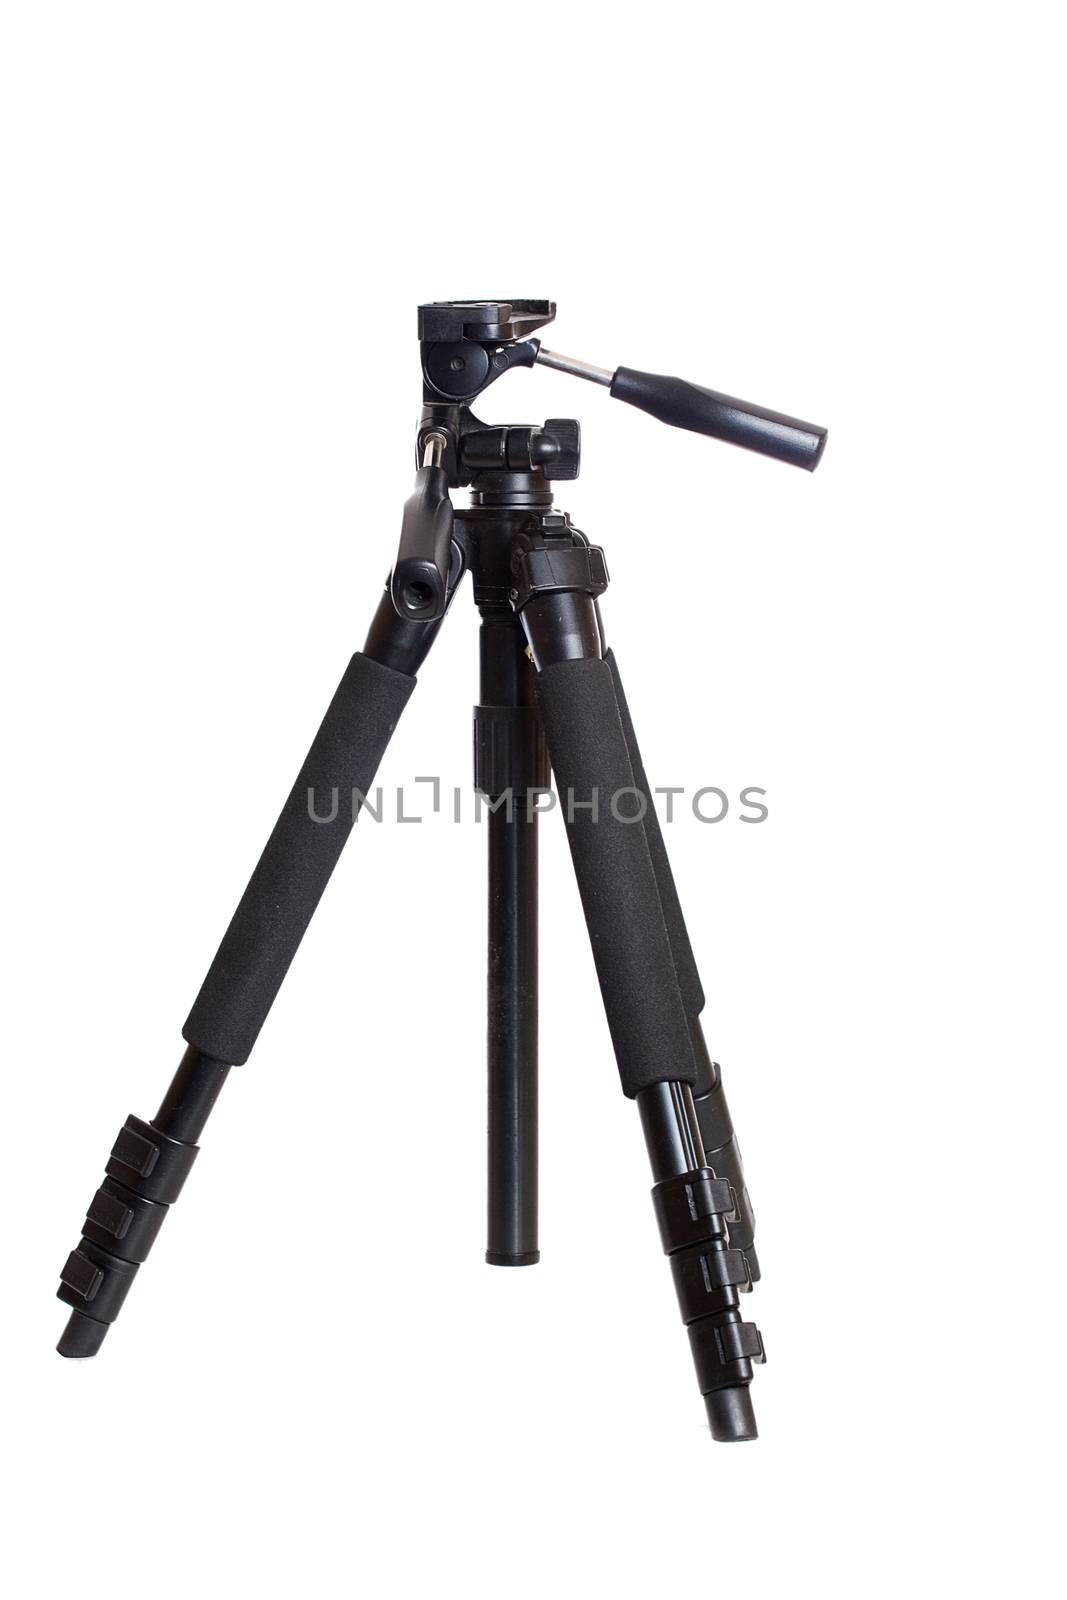 Camera Tripod with white background -isolated.